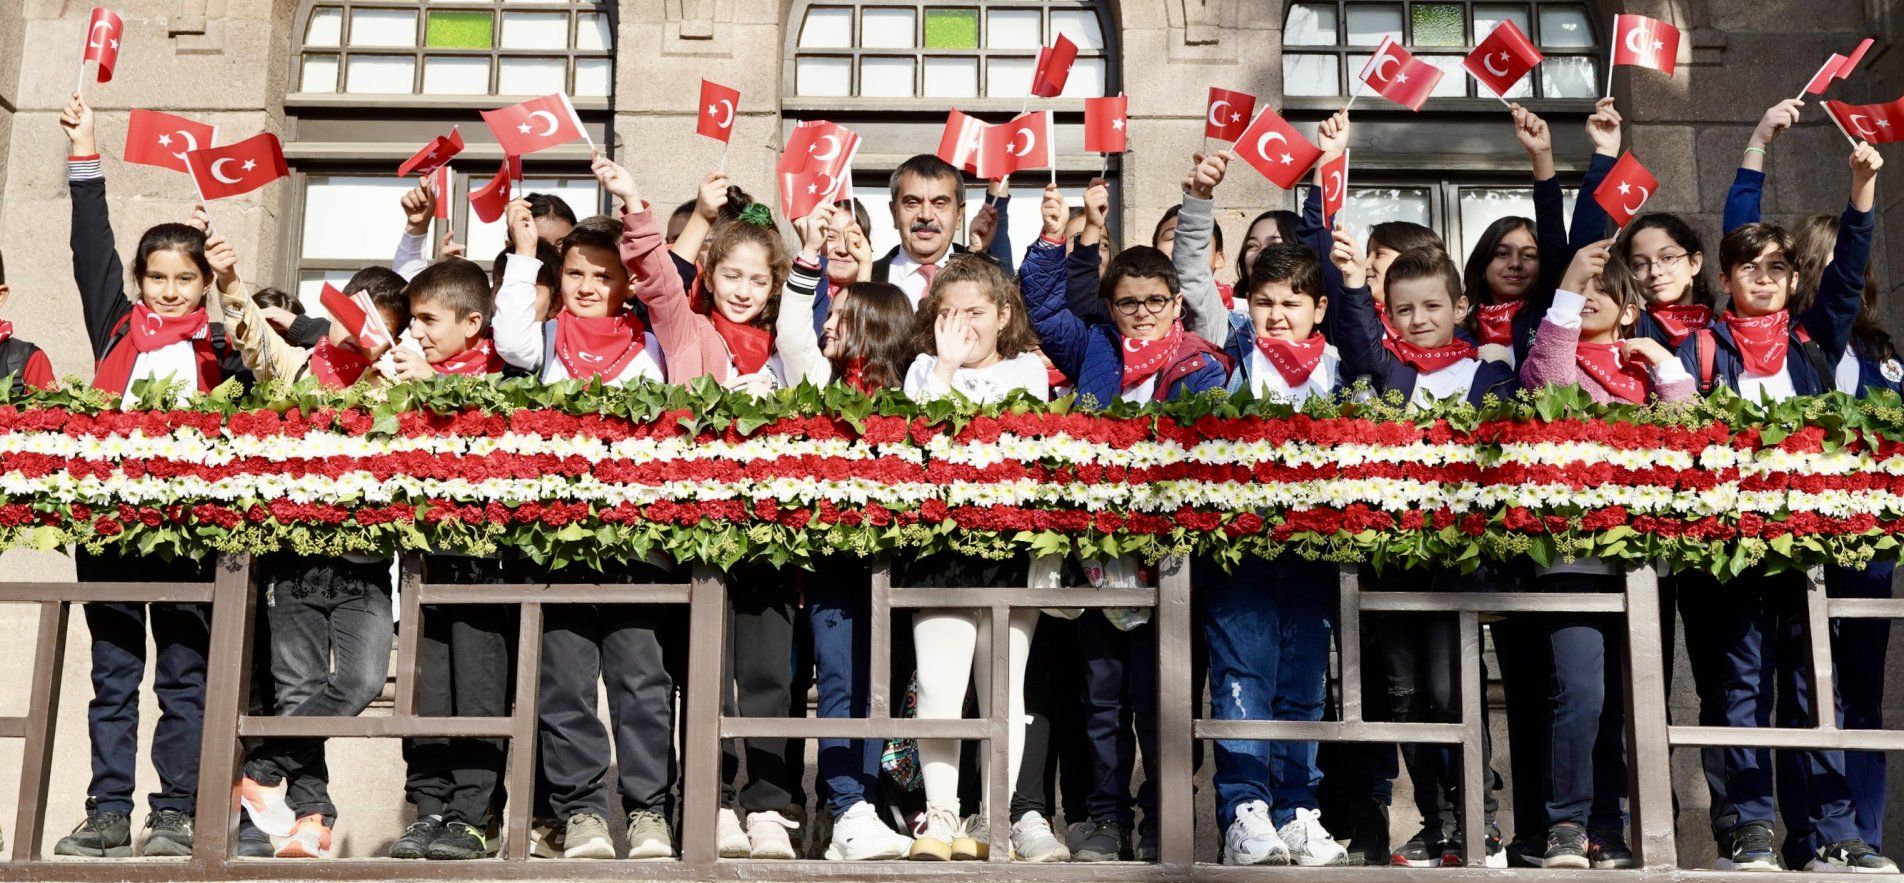 MINISTER TEKIN VISITS THE FIRST GRAND NATIONAL ASSEMBLY OF TÜRKİYE WITH STUDENTS